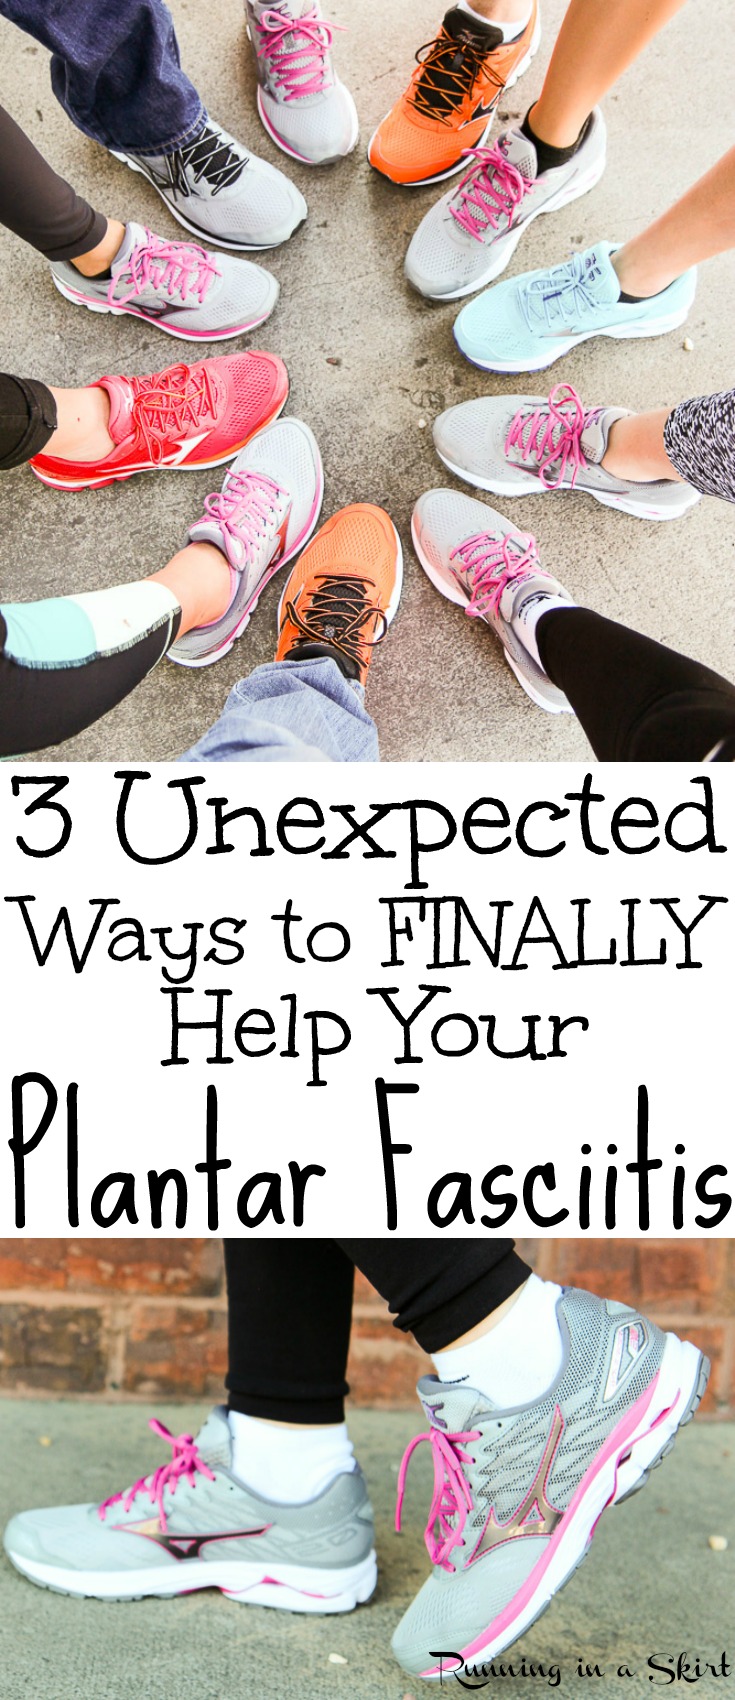 3 Unexpected Ways I Found Plantar Fasciitis Relief - includes exercises,  treatments (Acupuncture) and remedies to did to finally ease the symptoms from a long time runner. Simple, natural and DIY ideas. Also a favorite shoes that helped. / Running in a Skirt via @juliewunder